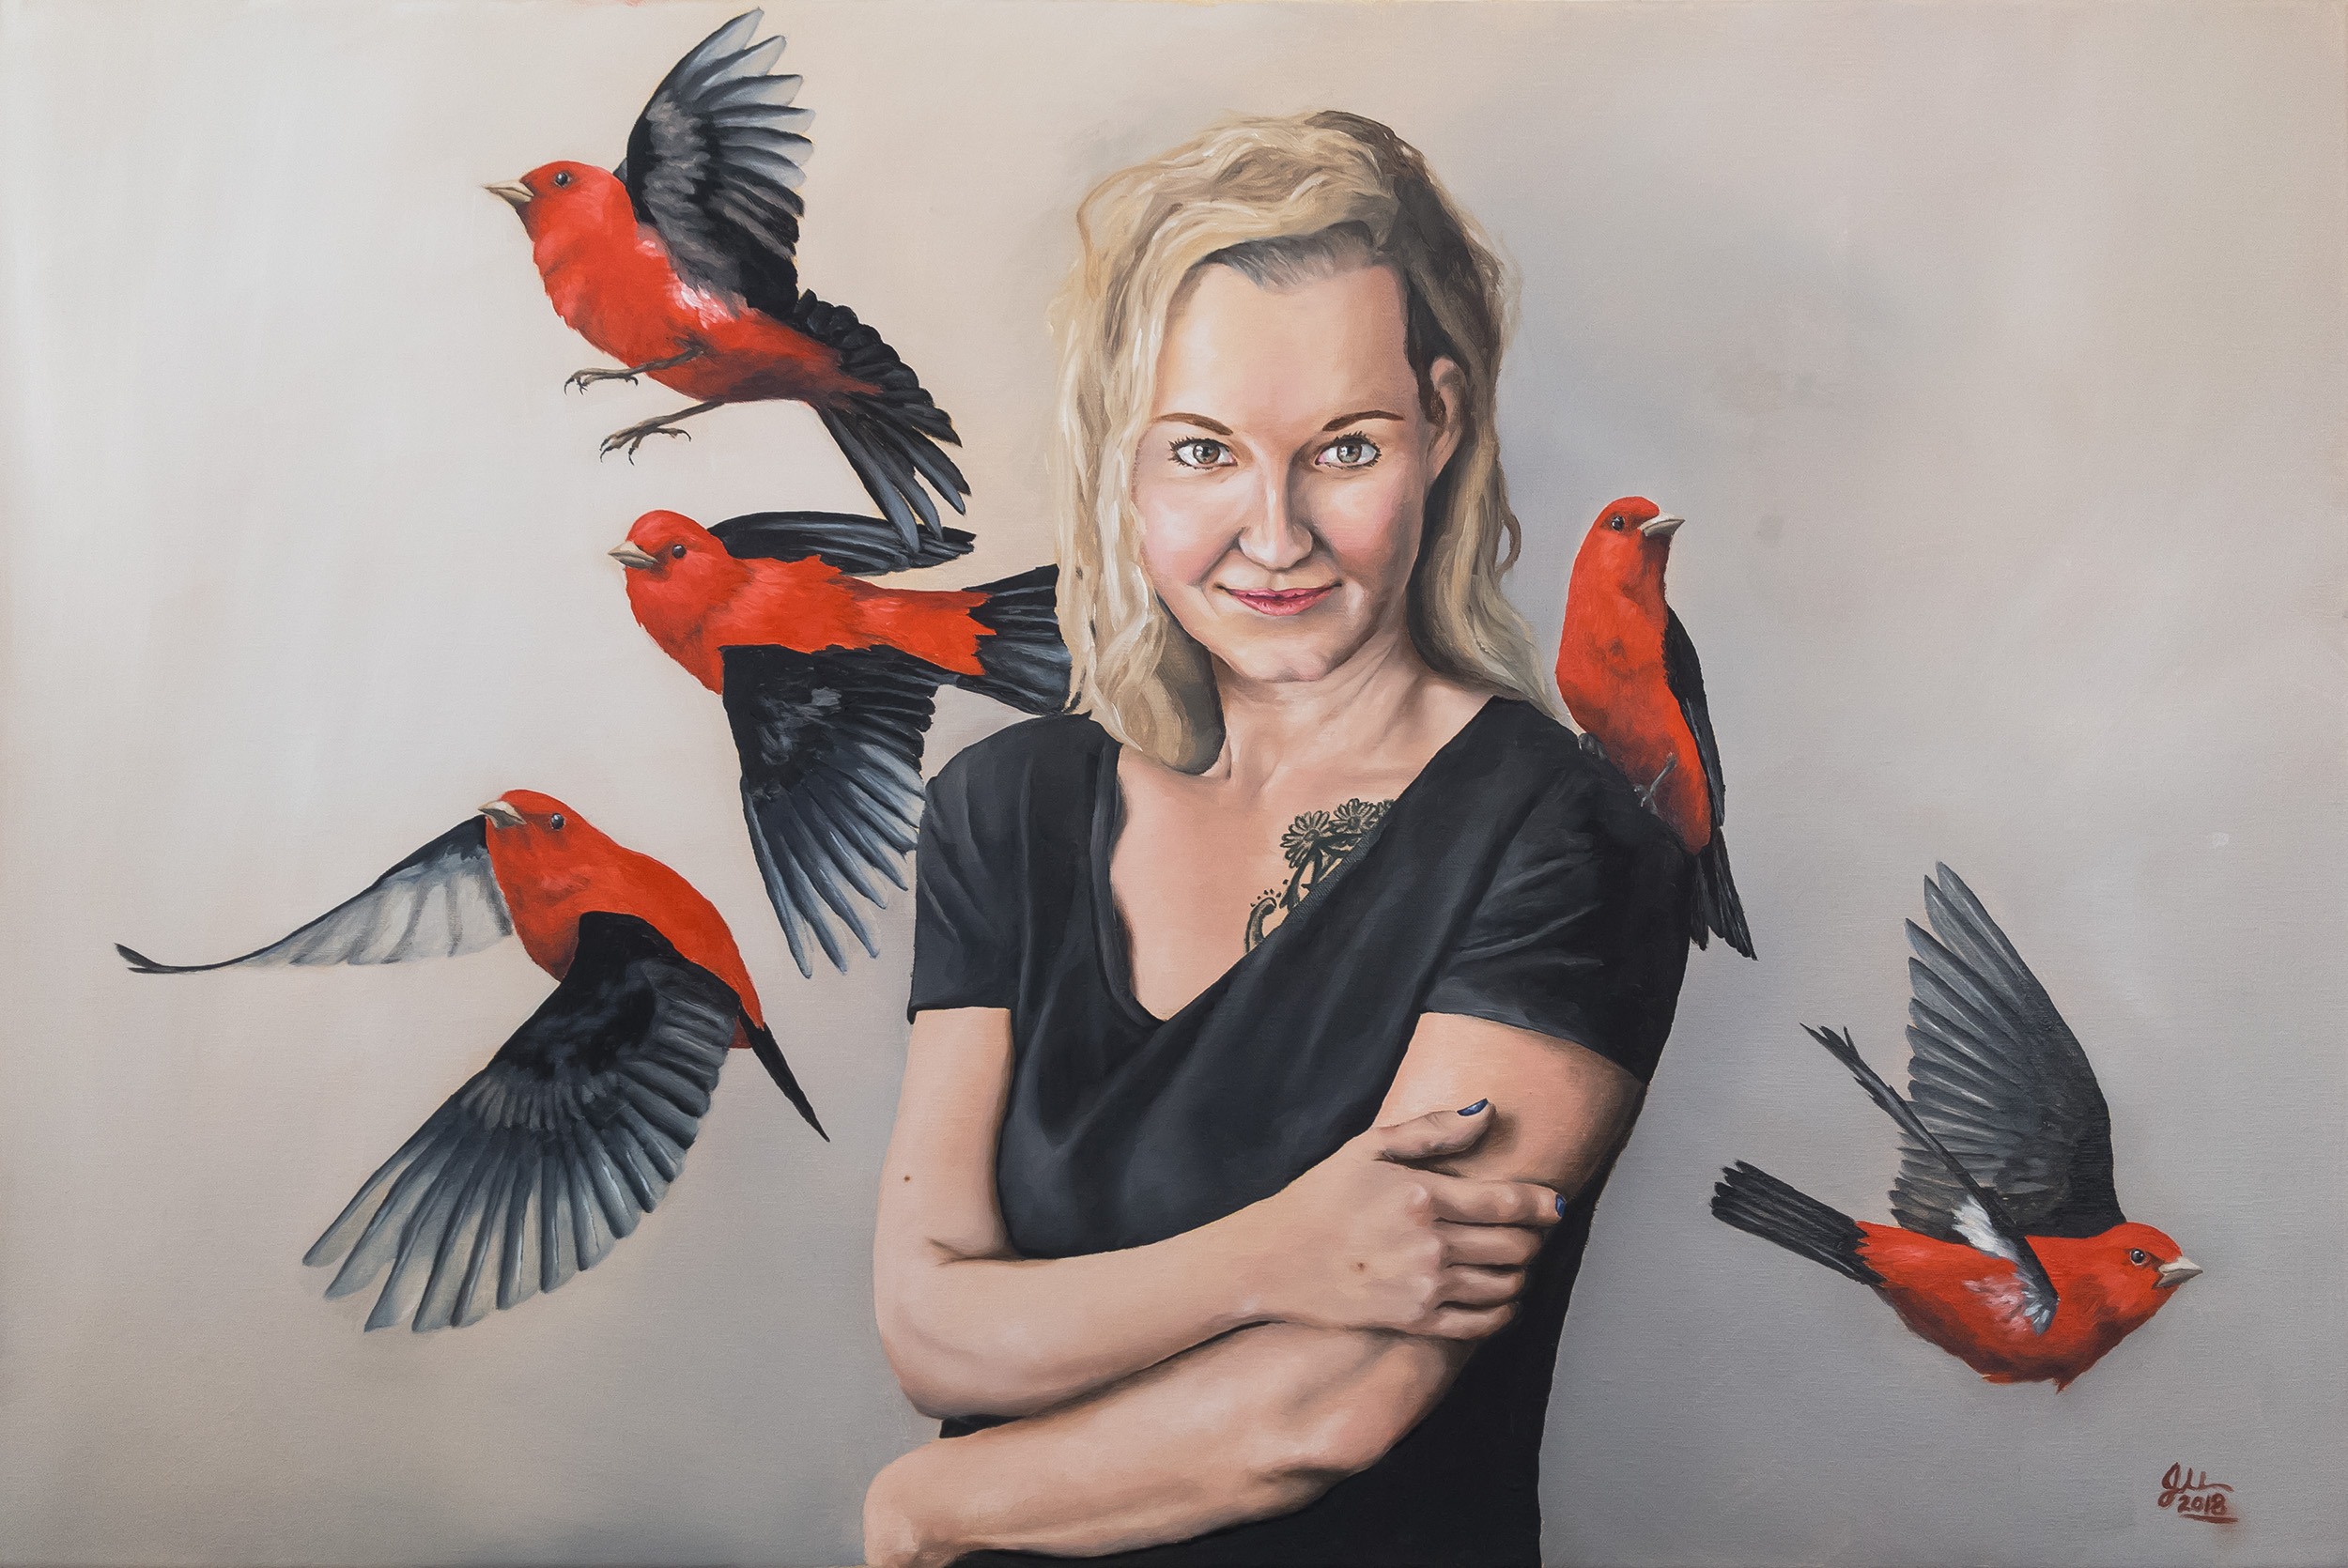   SARAH   Oil on linen, 20x30”, 2018  Selection for the 2019 Annual Juried Exhibition, MacRostie Art Center, Grand Rapids, MN 